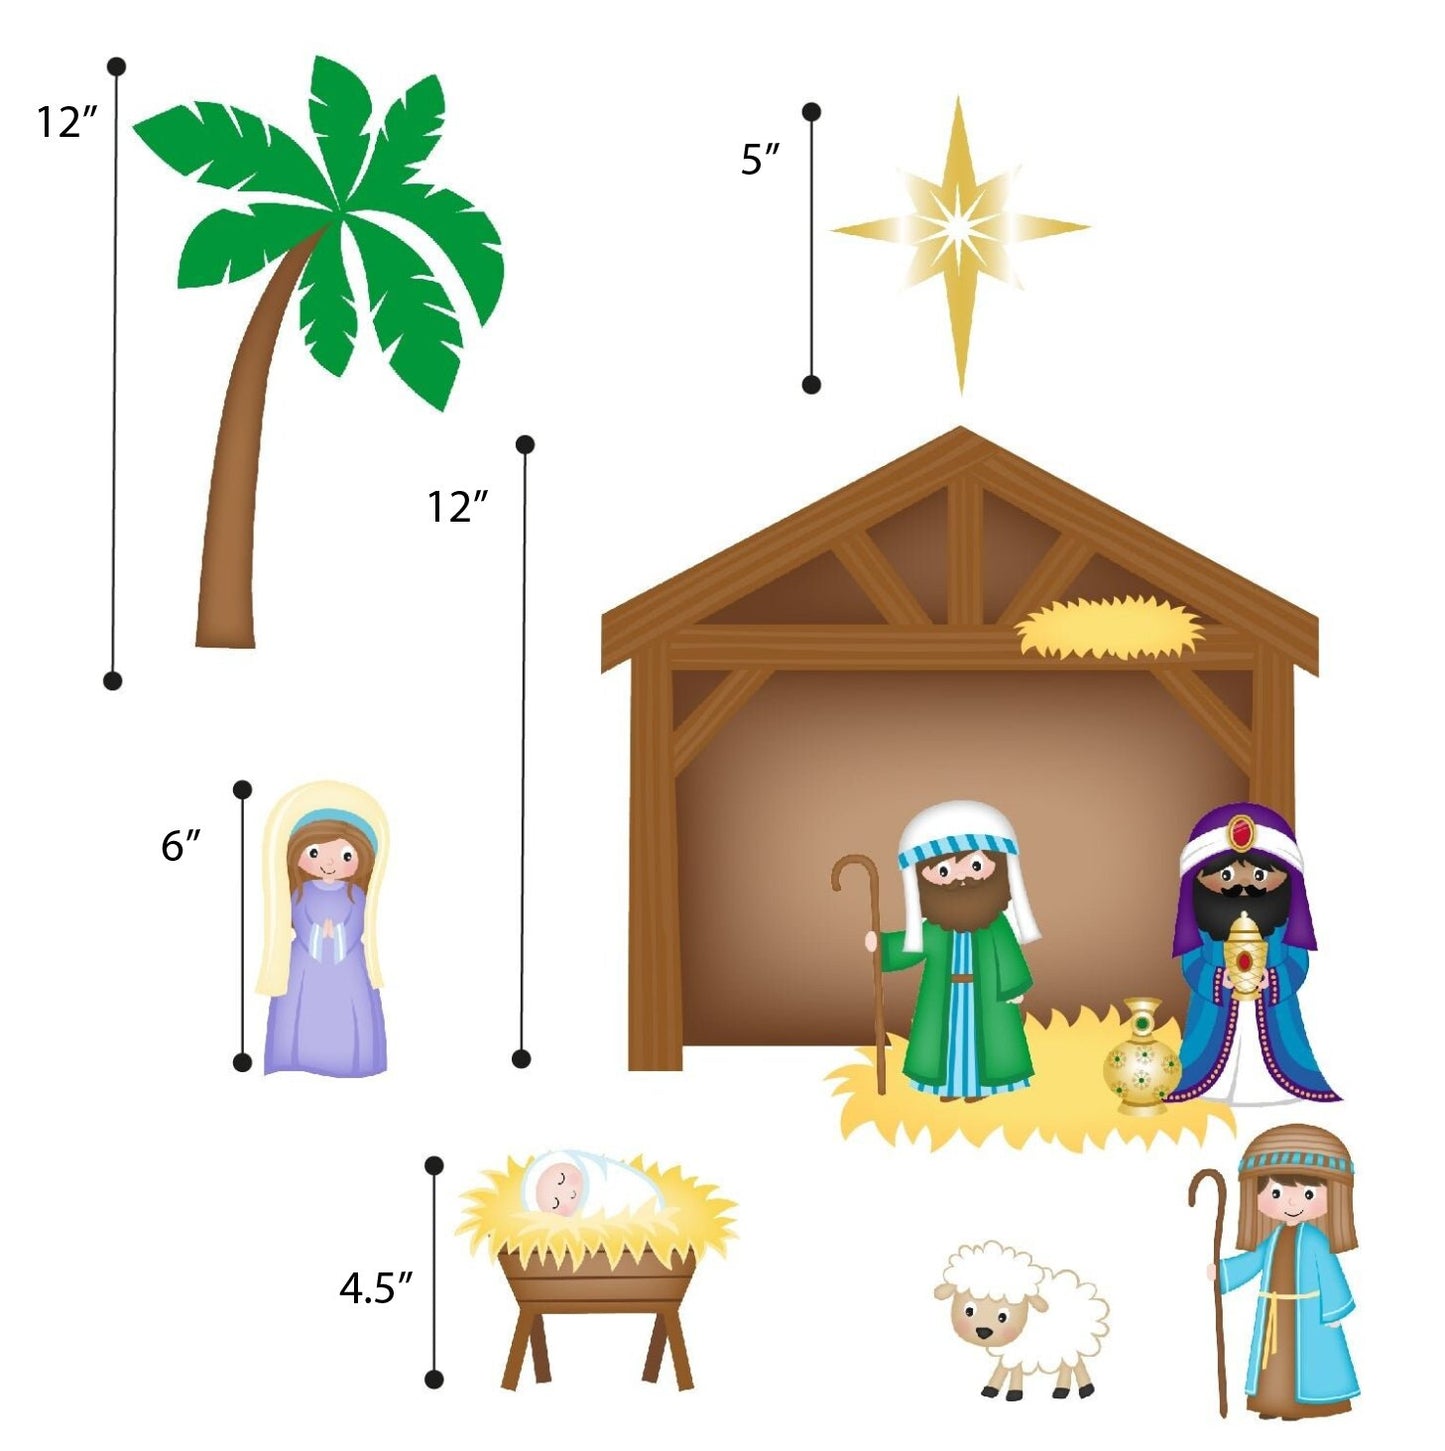 Advent Calendar Wall Decals Nativity for Kids • Countdown to Christmas! - Picture Perfect Decals